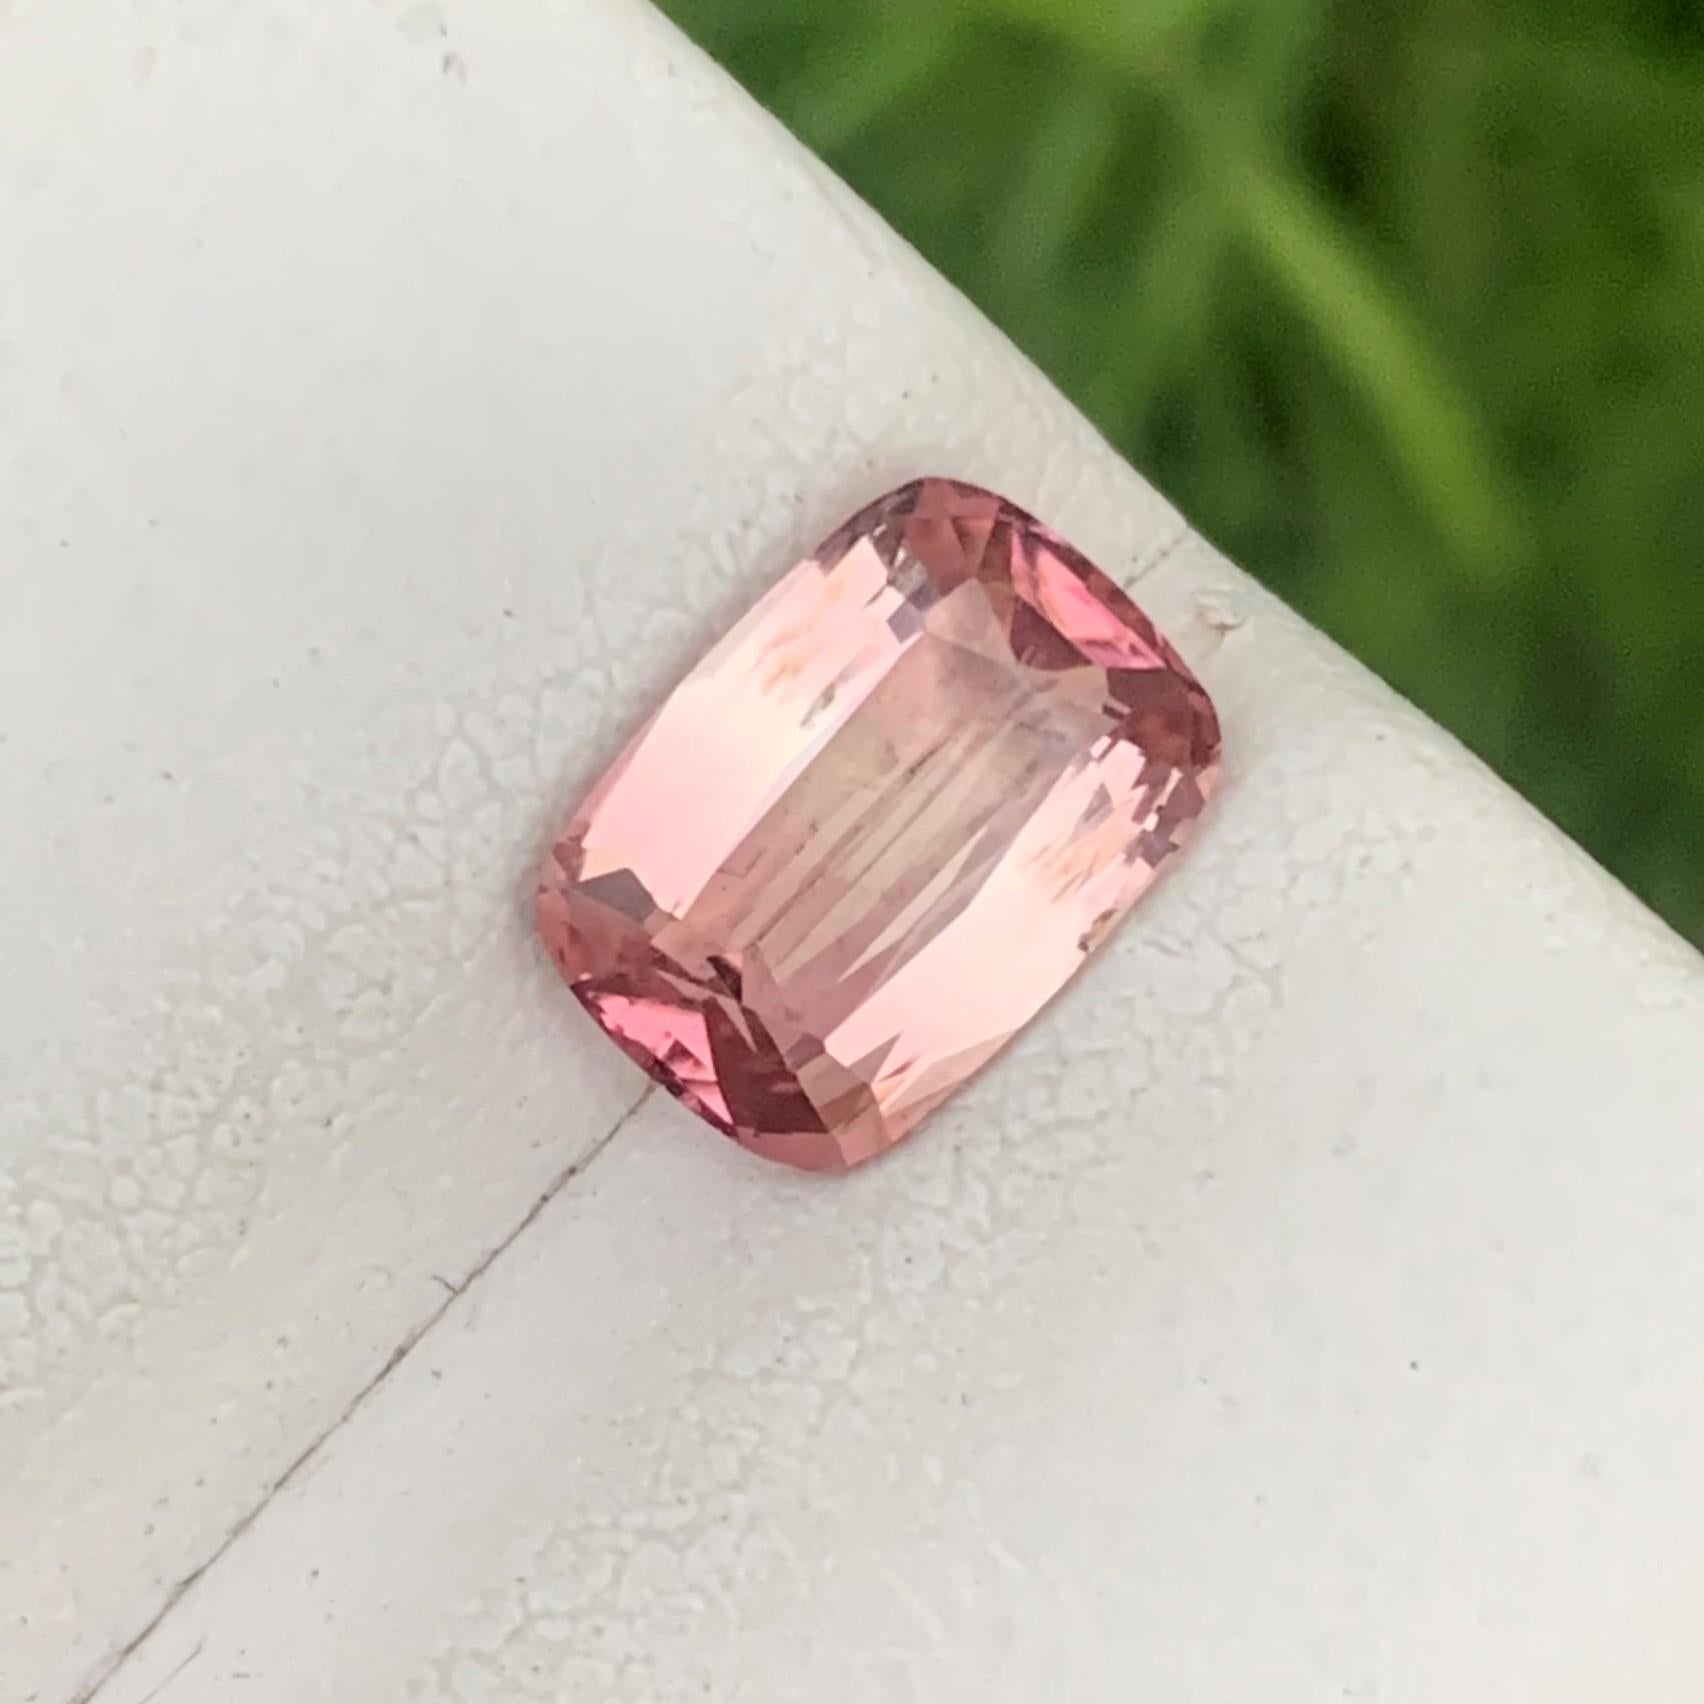 Gemstone Type : Tourmaline
Weight : 1.60 Carats
Dimensions : 8.7x6.2x3.8 Mm
Origin : Kunar Afghanistan
Clarity : Eye Clean
Shape: Cushion
Color: Peachy Pink
Certificate: On Demand
Basically, mint tourmalines are tourmalines with pastel hues of light